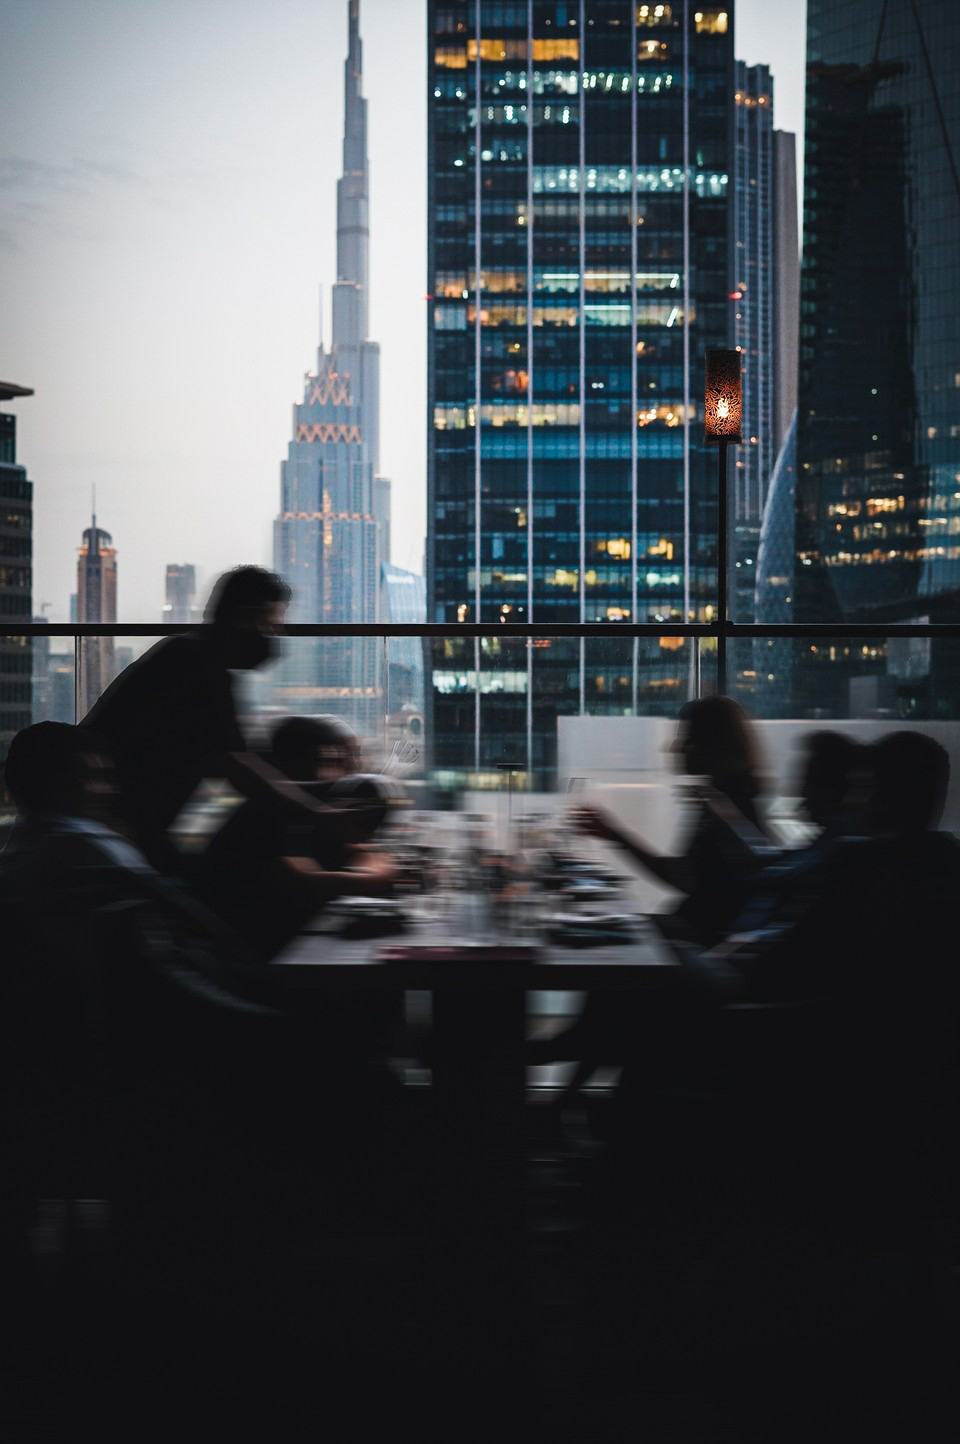 CLAP Dubai Interior, with a view of the Burj Khalifa during a private event